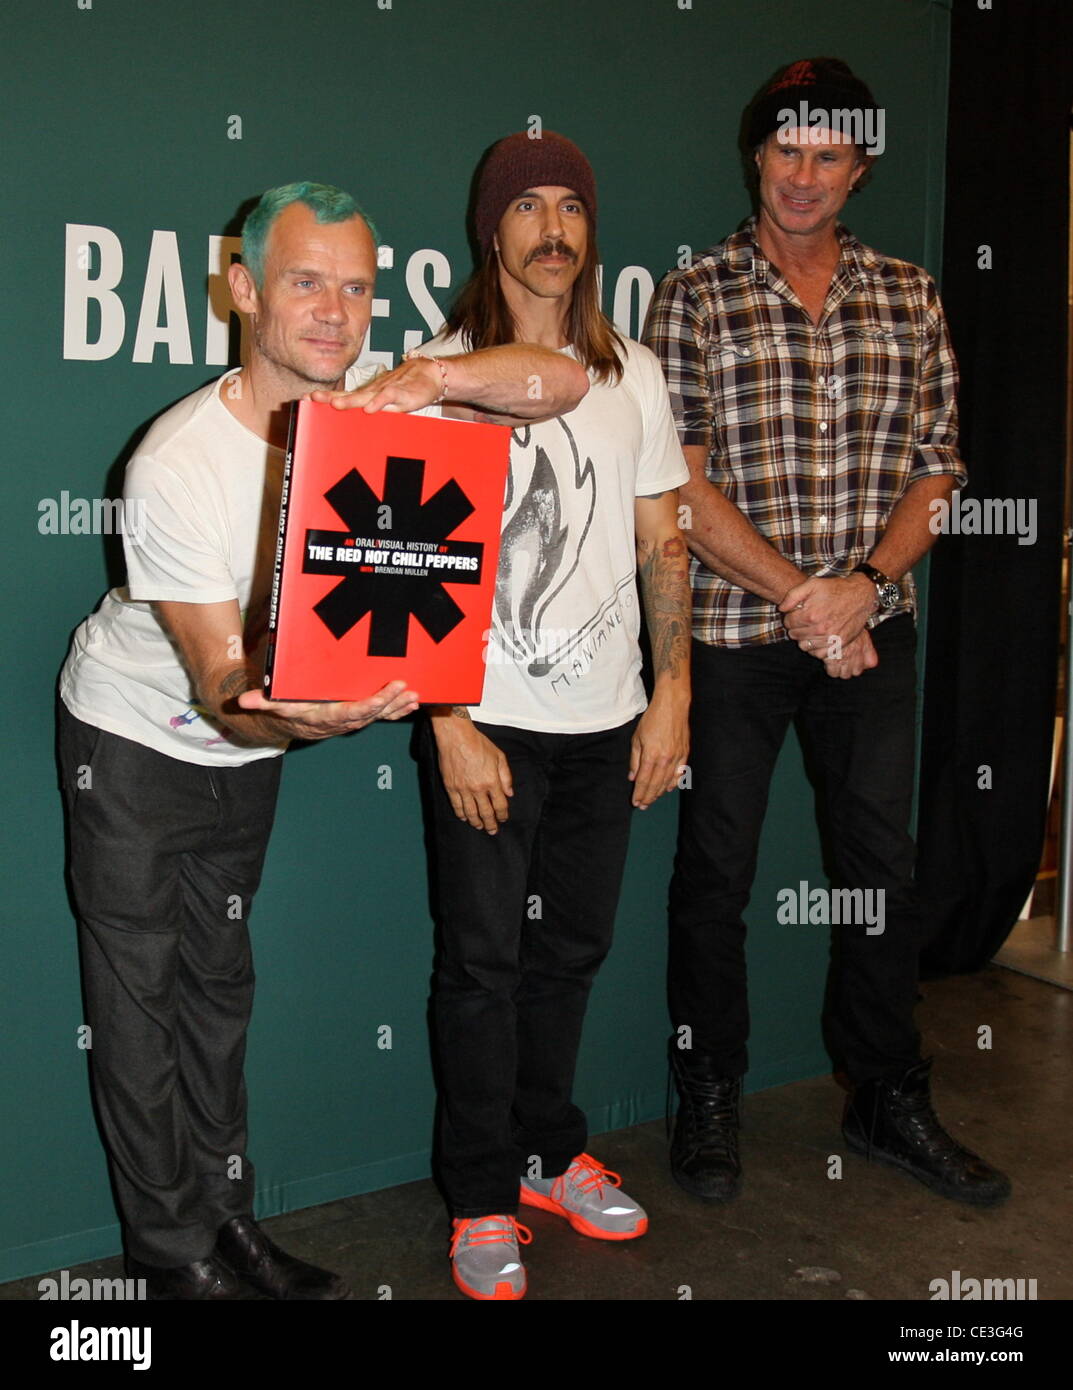 Flea aka Michael Peter Balzary, Anthony Kiedis and Chad Smith Red Hot Chili Peppers promote their new book 'The Red Hot Chili Peppers: An Oral/Visual History' at The Grove in Hollywood Los Angeles, California - 04.11.10 Stock Photo